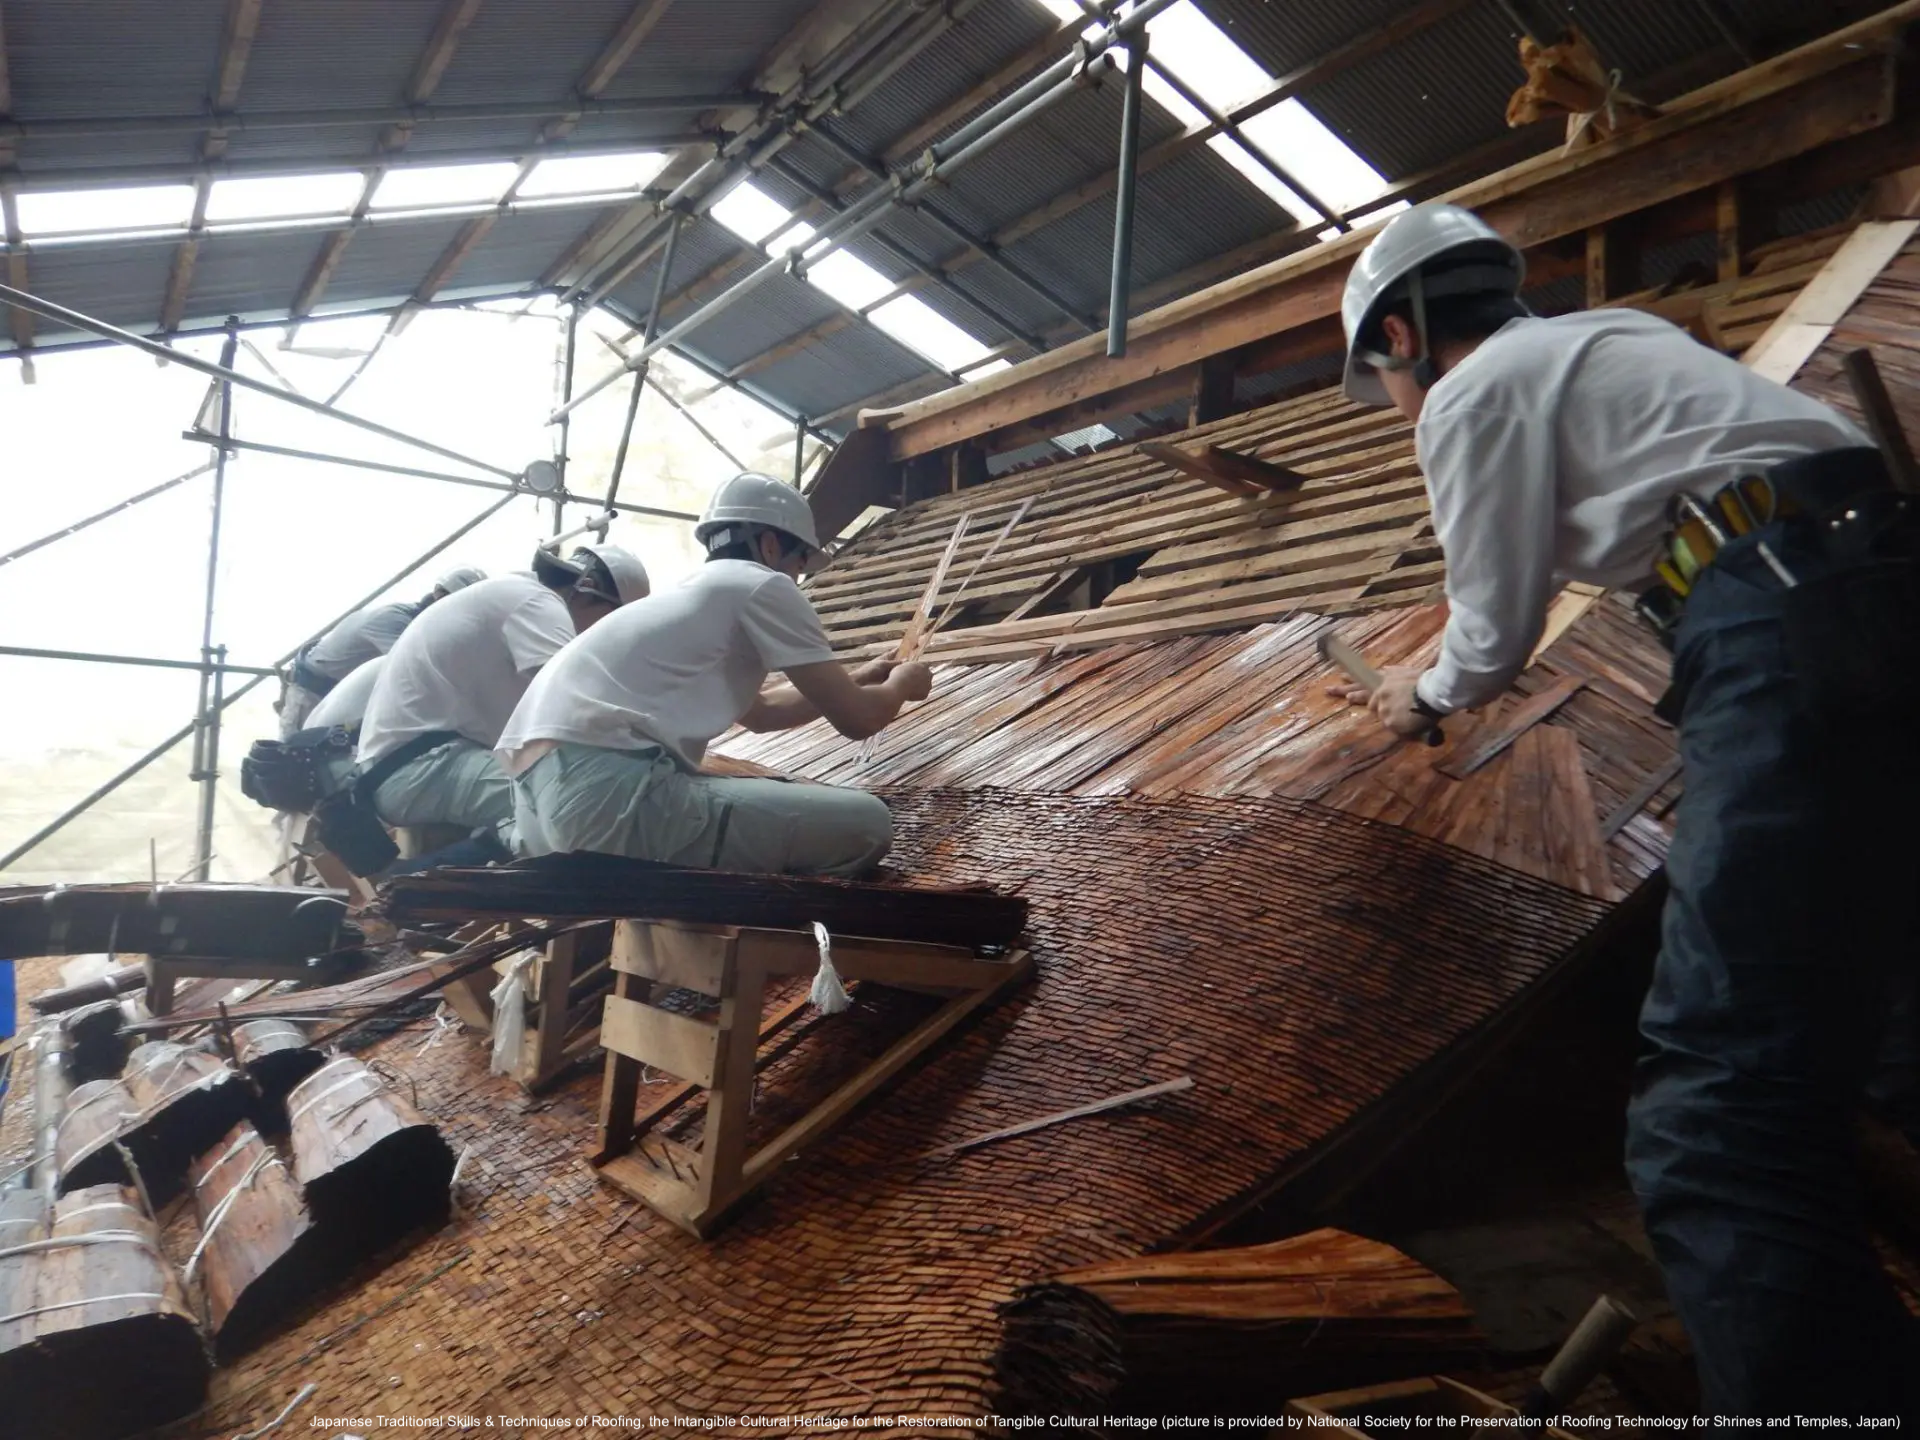 Japanese Traditional Skills & Techniques of Roofing, the Intangible Cultural Heritage for the Restoration of Tangible Cultural Heritage (picture is provided by National Society for the Preservation of Roofing Technology for Shrines and Temples, Japan)